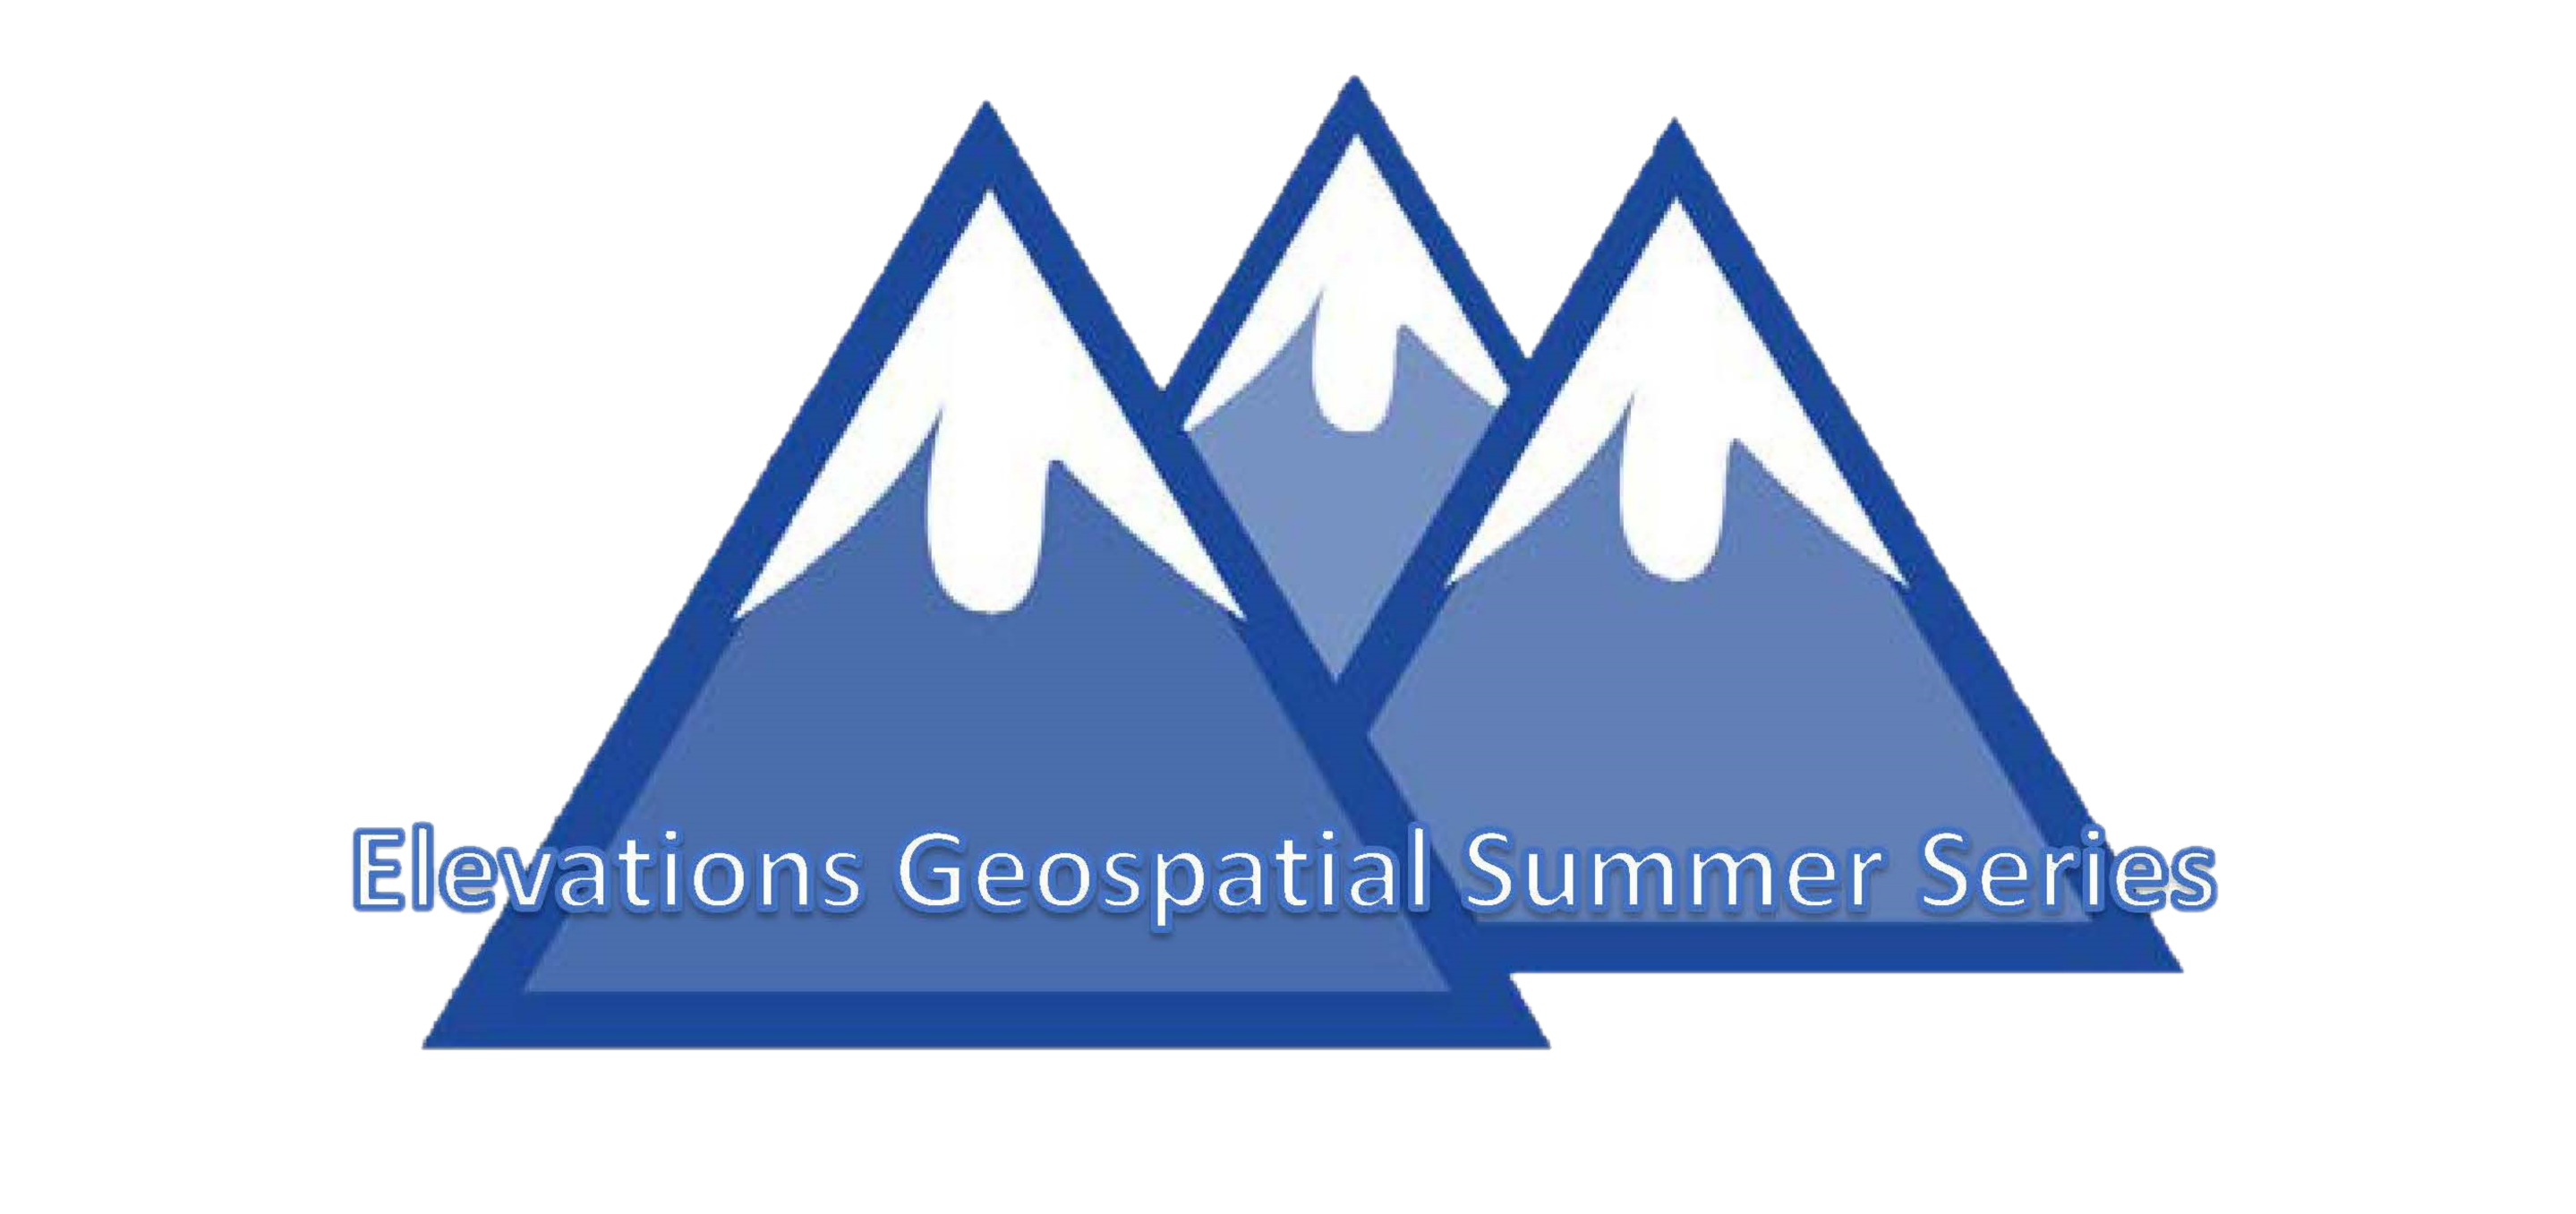 Save the Date for the Elevations Geospatial Summit!